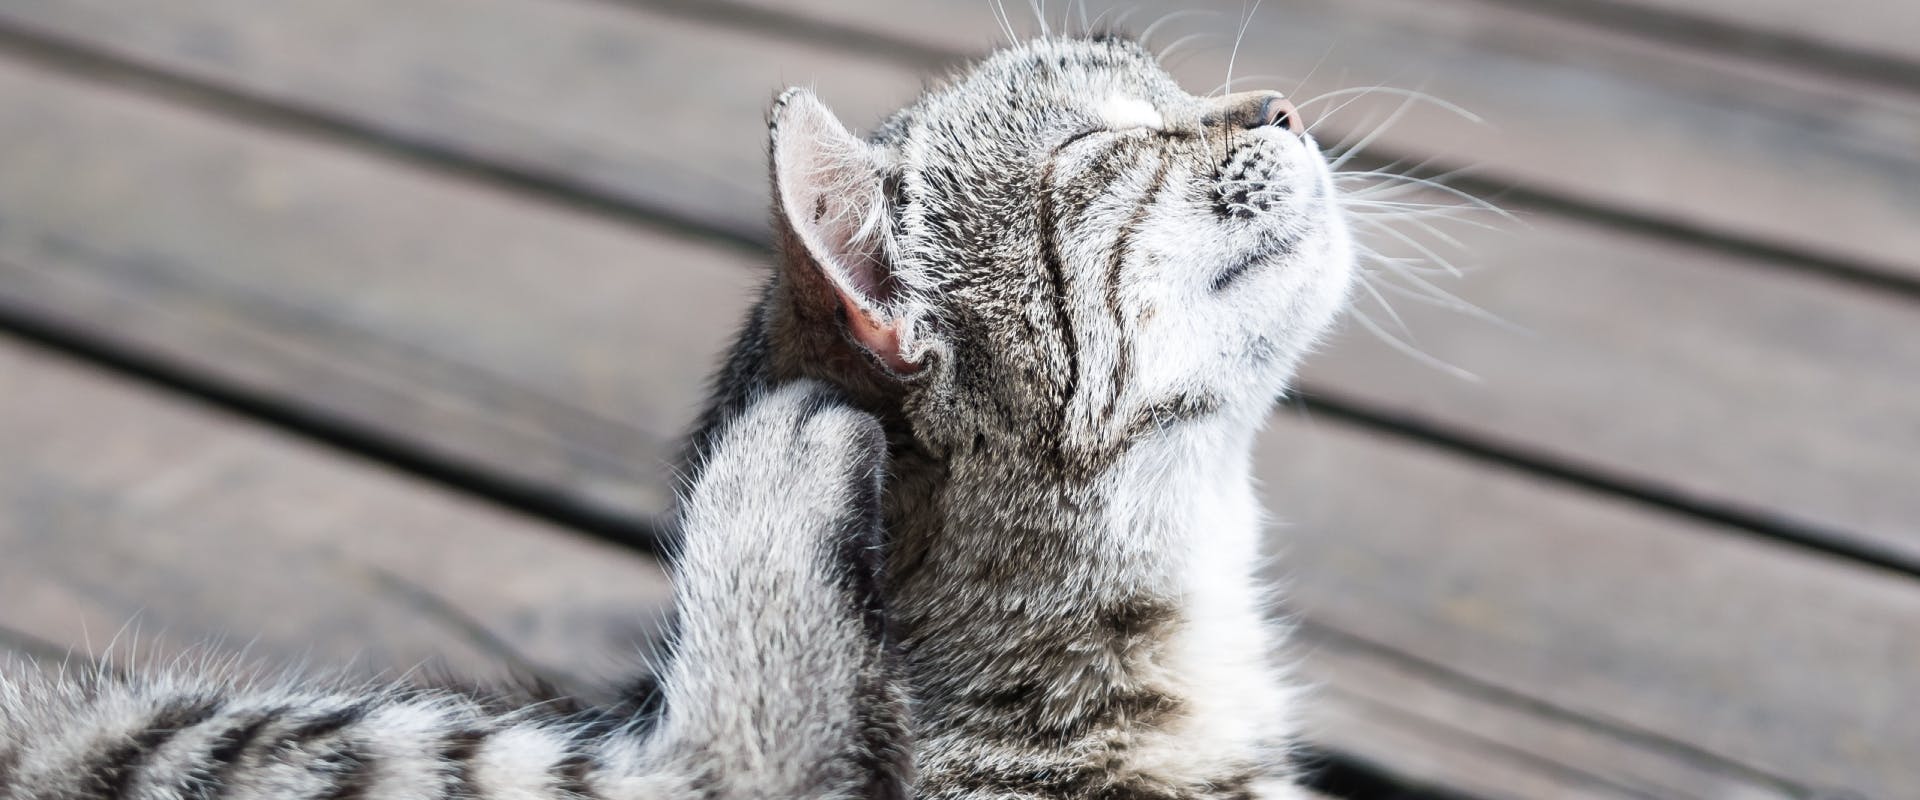 gray tabby short hairded cat lying on a decking scratching its ear